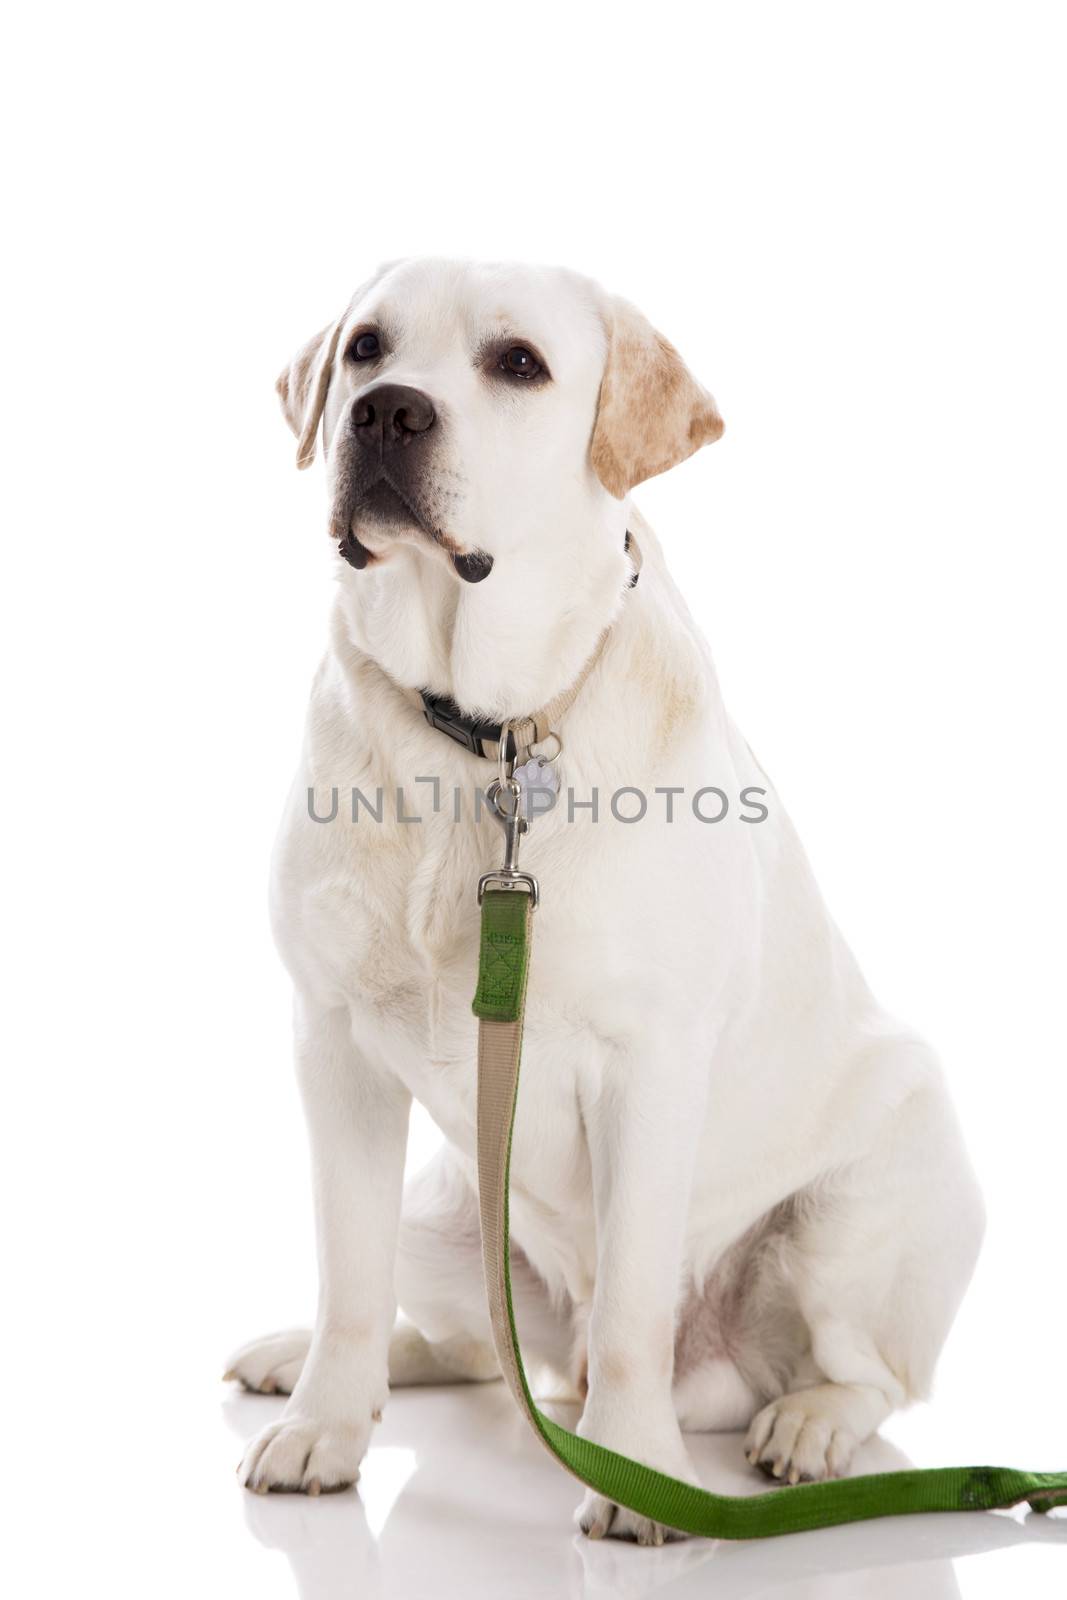 Beautiful labrador retriever sitting on floor with a leash, isolated on white background